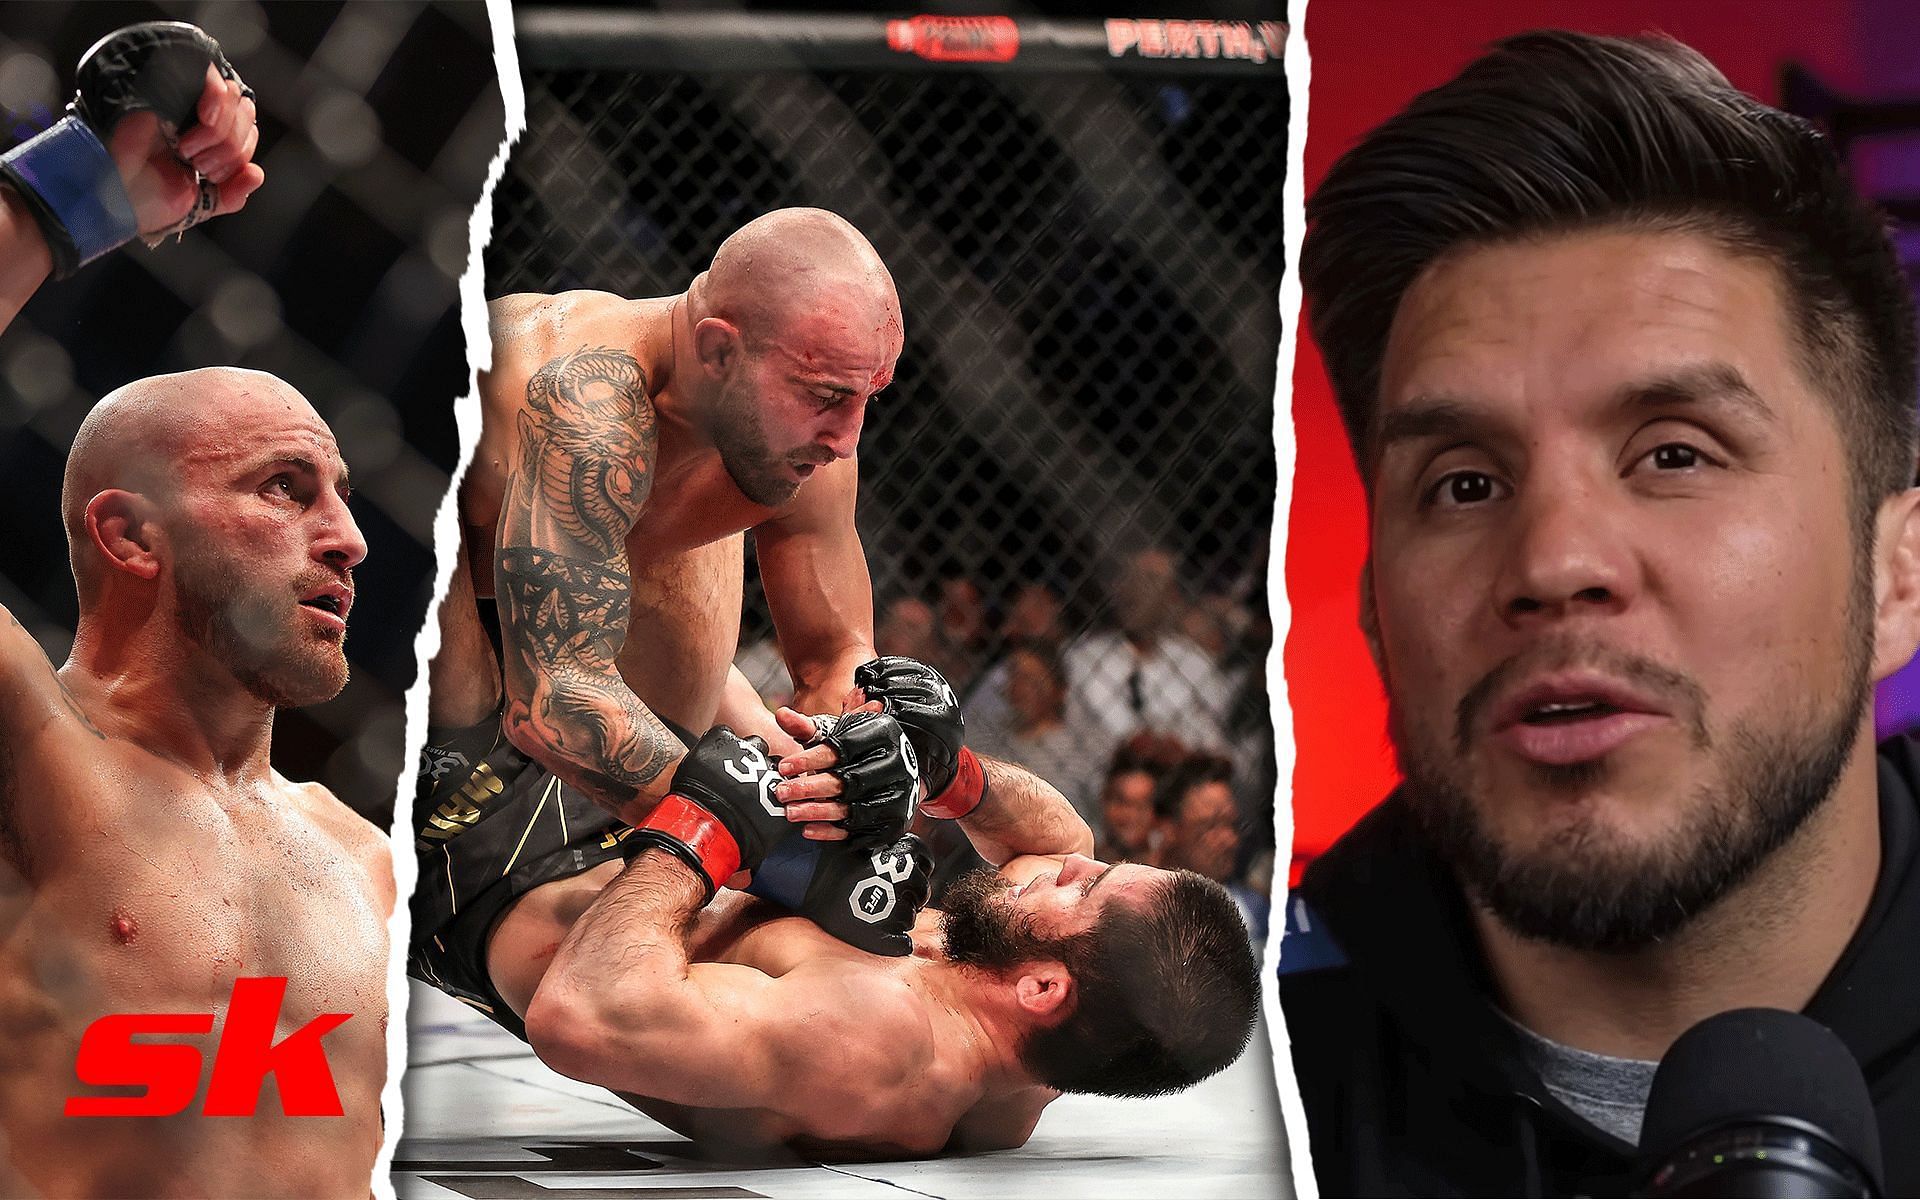 Alexander Volkanovski (left), UFC 284 main event (middle) and Henry Cejudo (left) [Image credits: @HenryCejudo on Youtube and Getty Images]